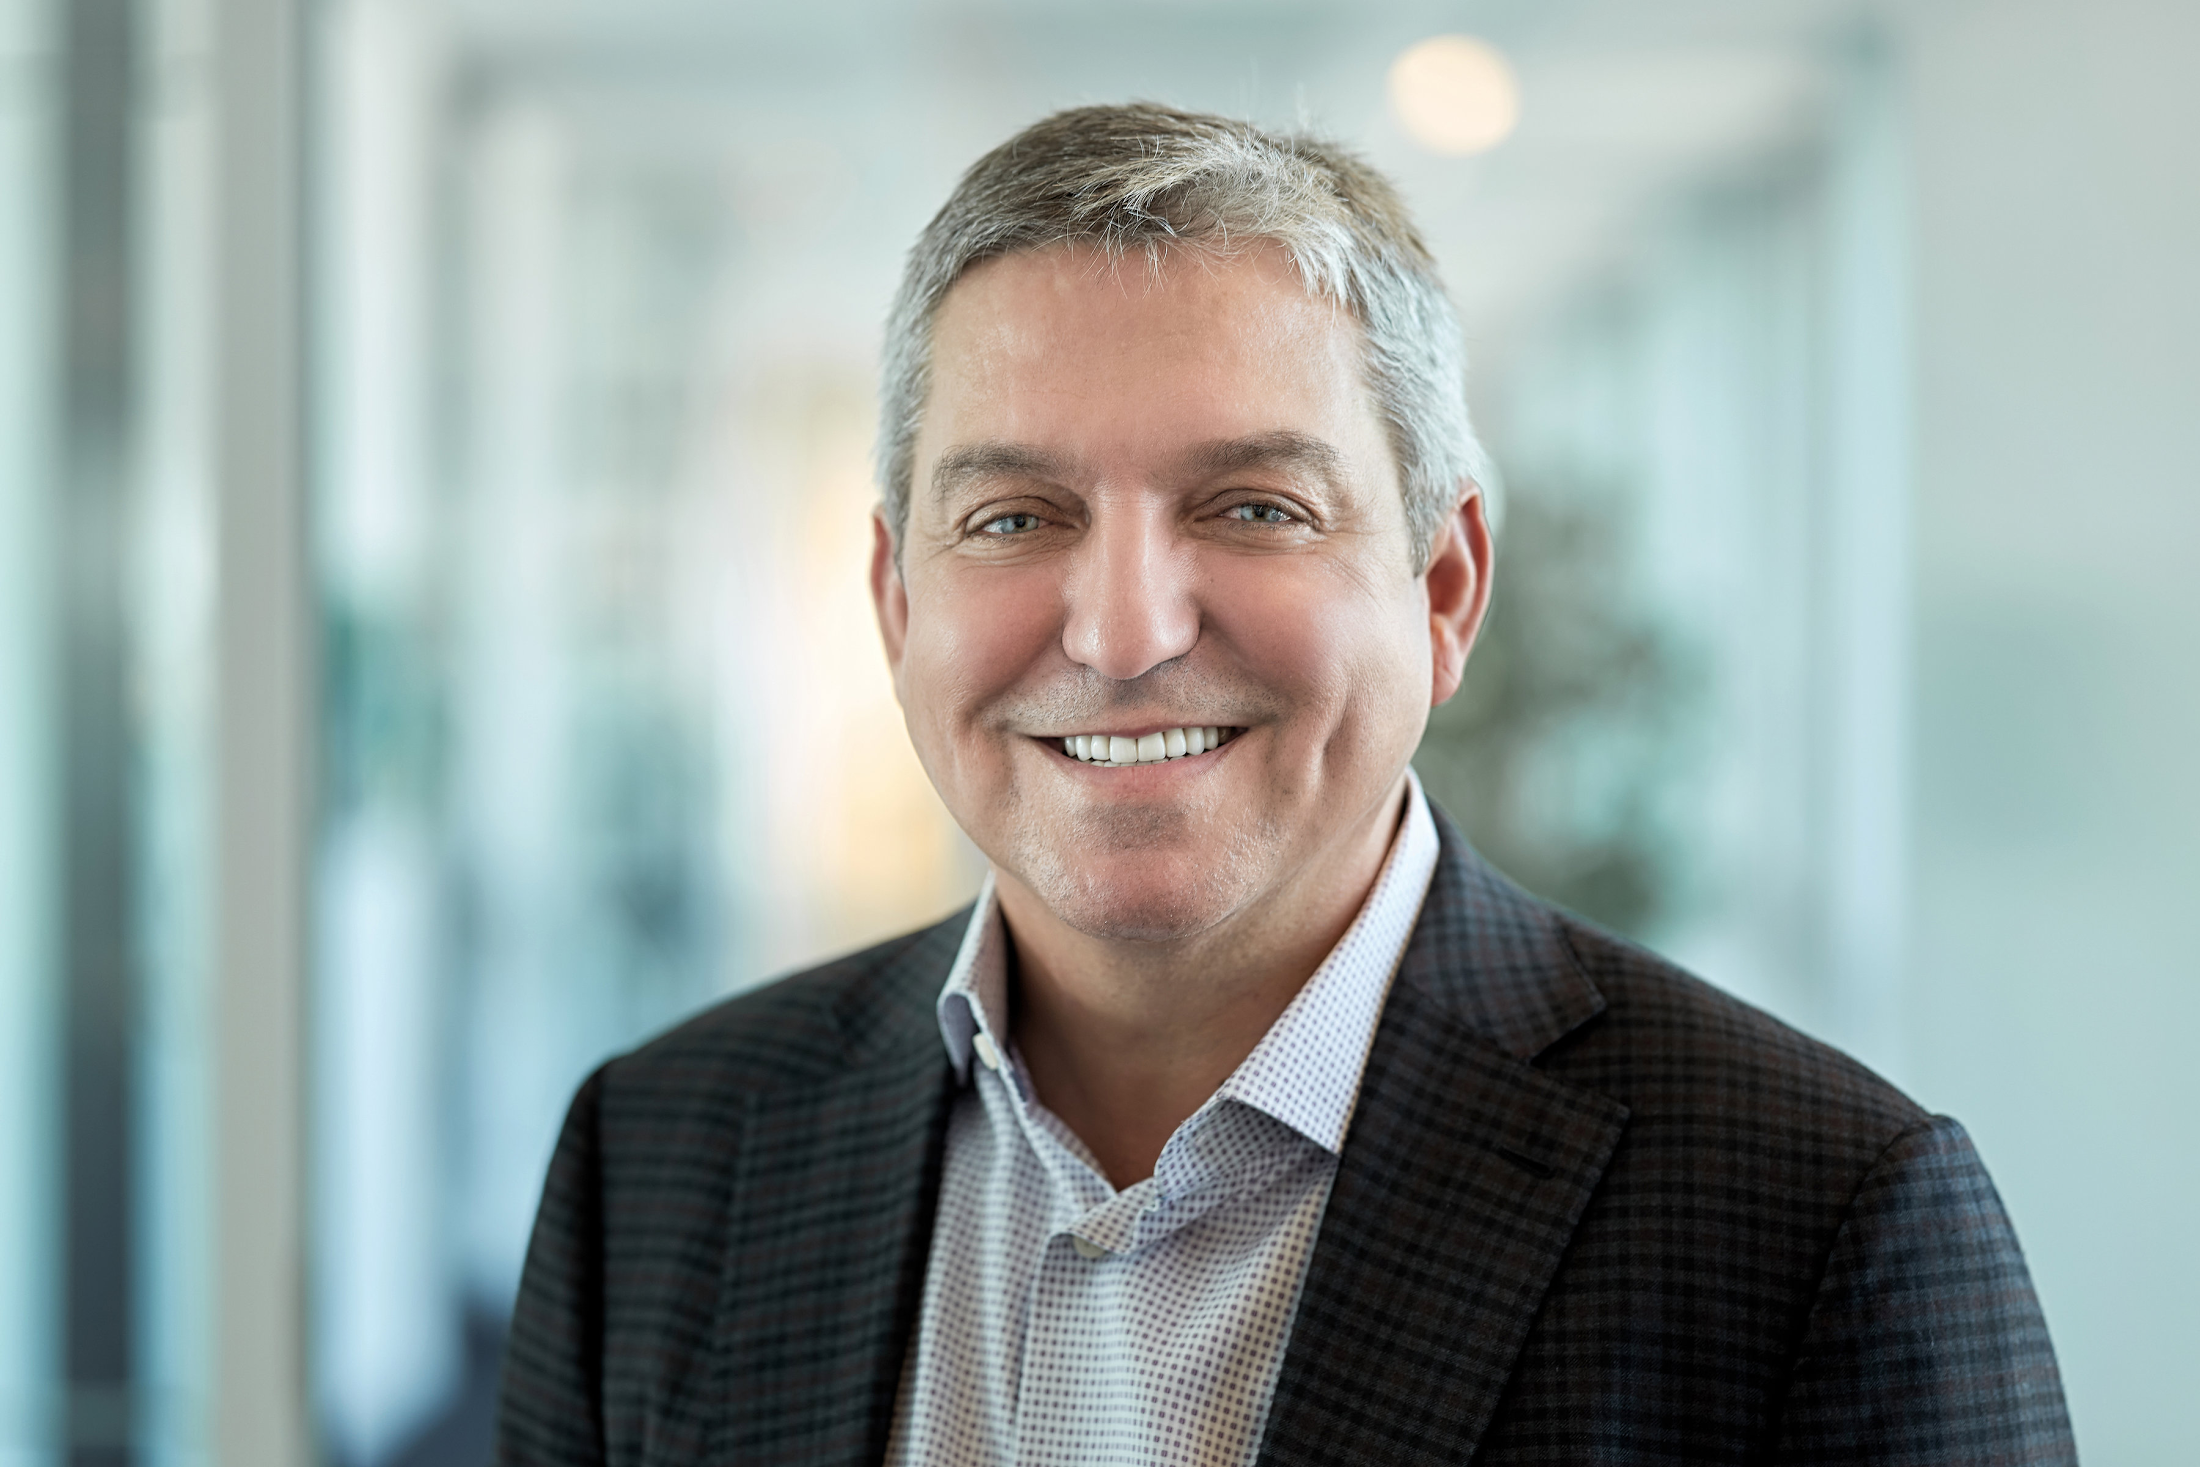 UiPath's stock plummets as CEO Rob Enslin abruptly resigns and guidance disappoints - SiliconANGLE